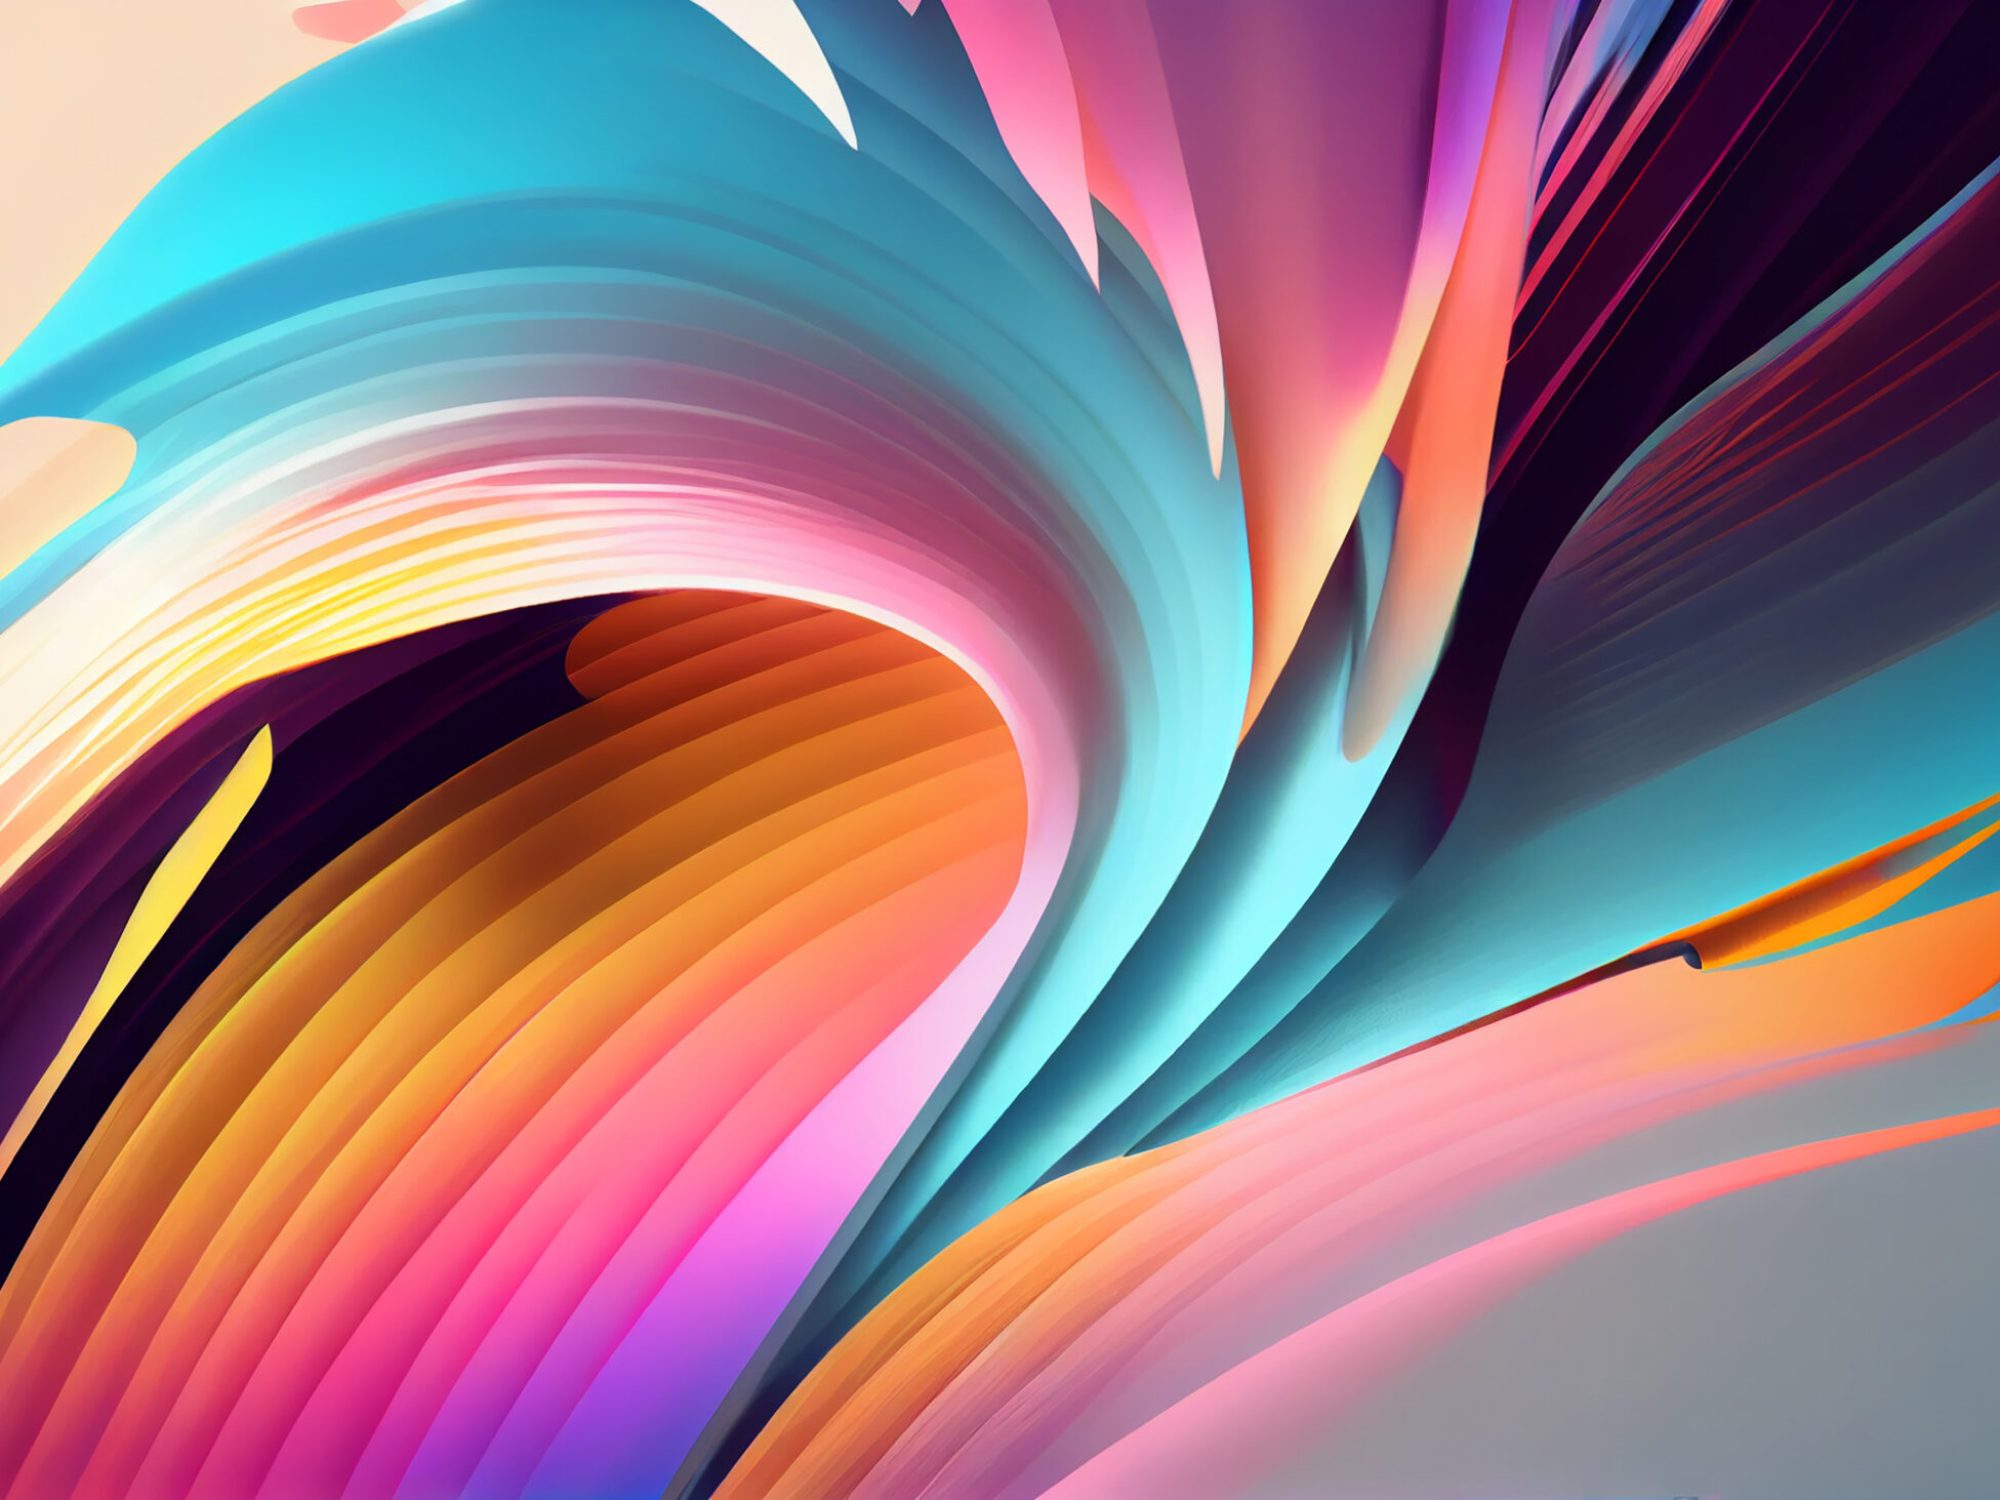 A vibrant futuristic abstract wallpaper with wave designs generated by artificial intelligence